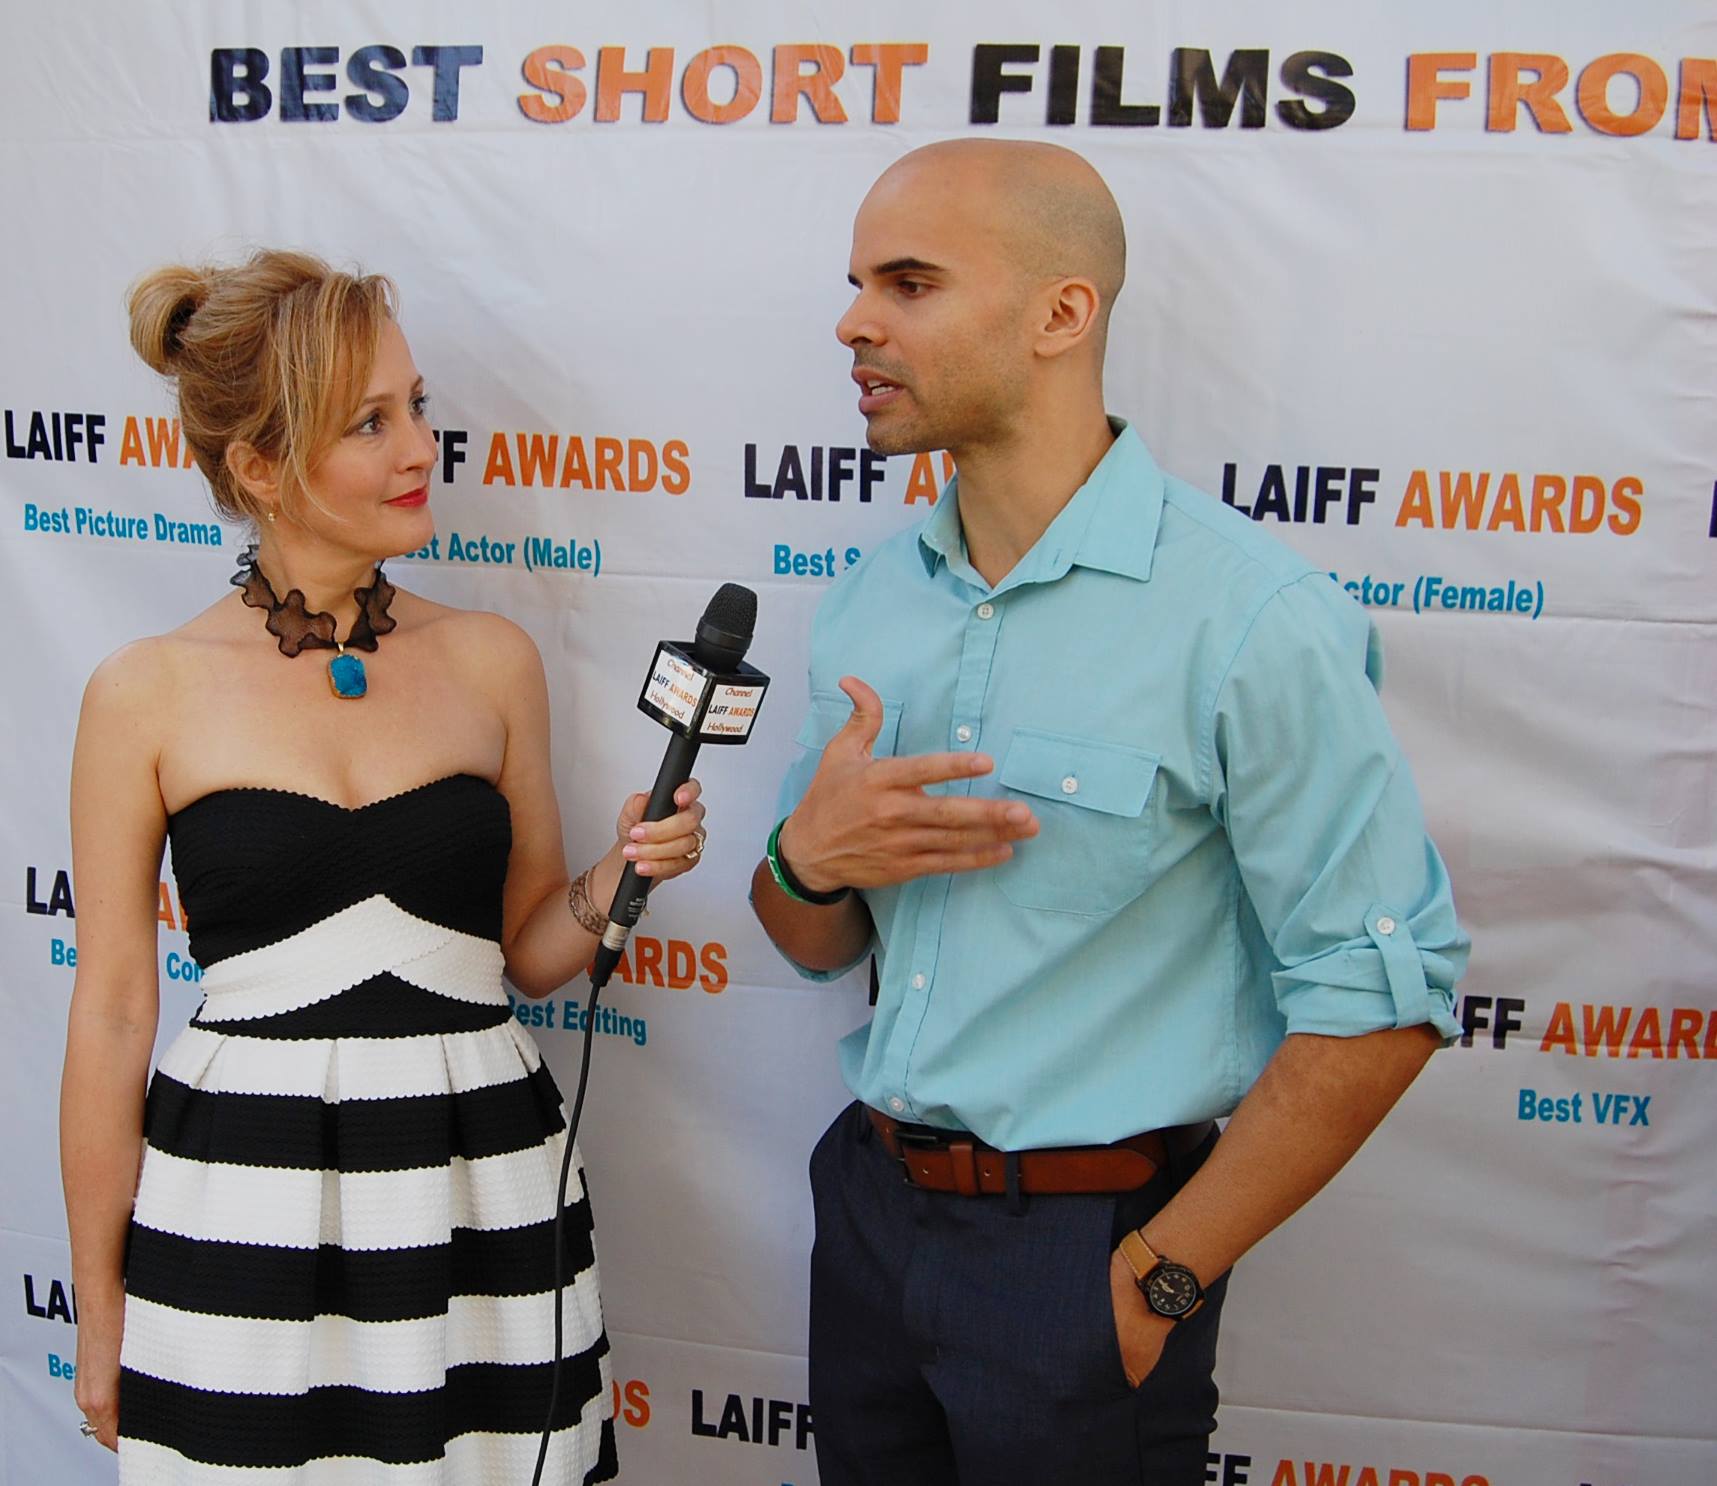 Getting interviewed at the Los Angeles International Film Festival